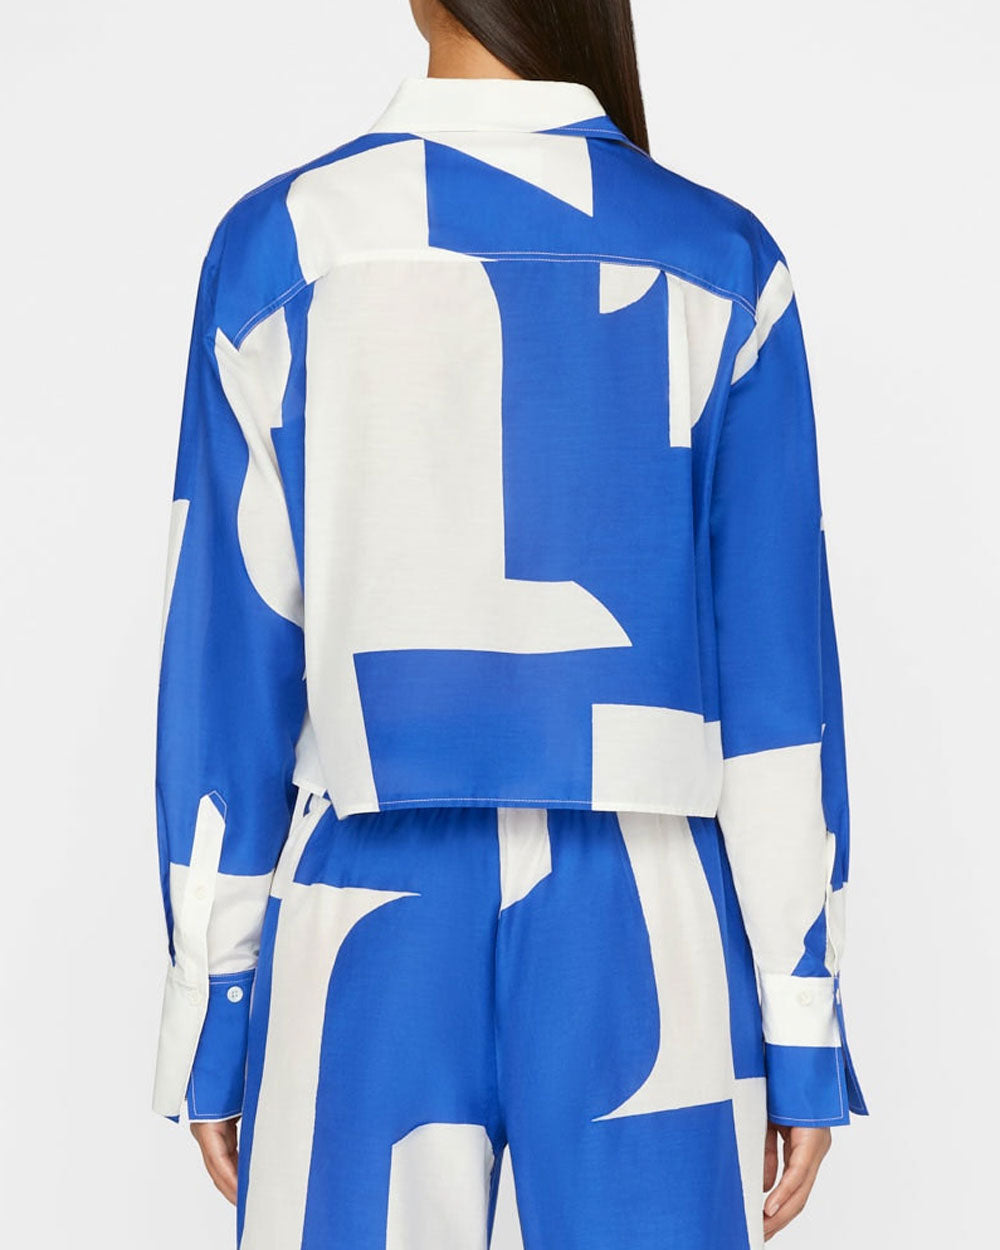 The Cropped Oversize Shirt in Ultramarine